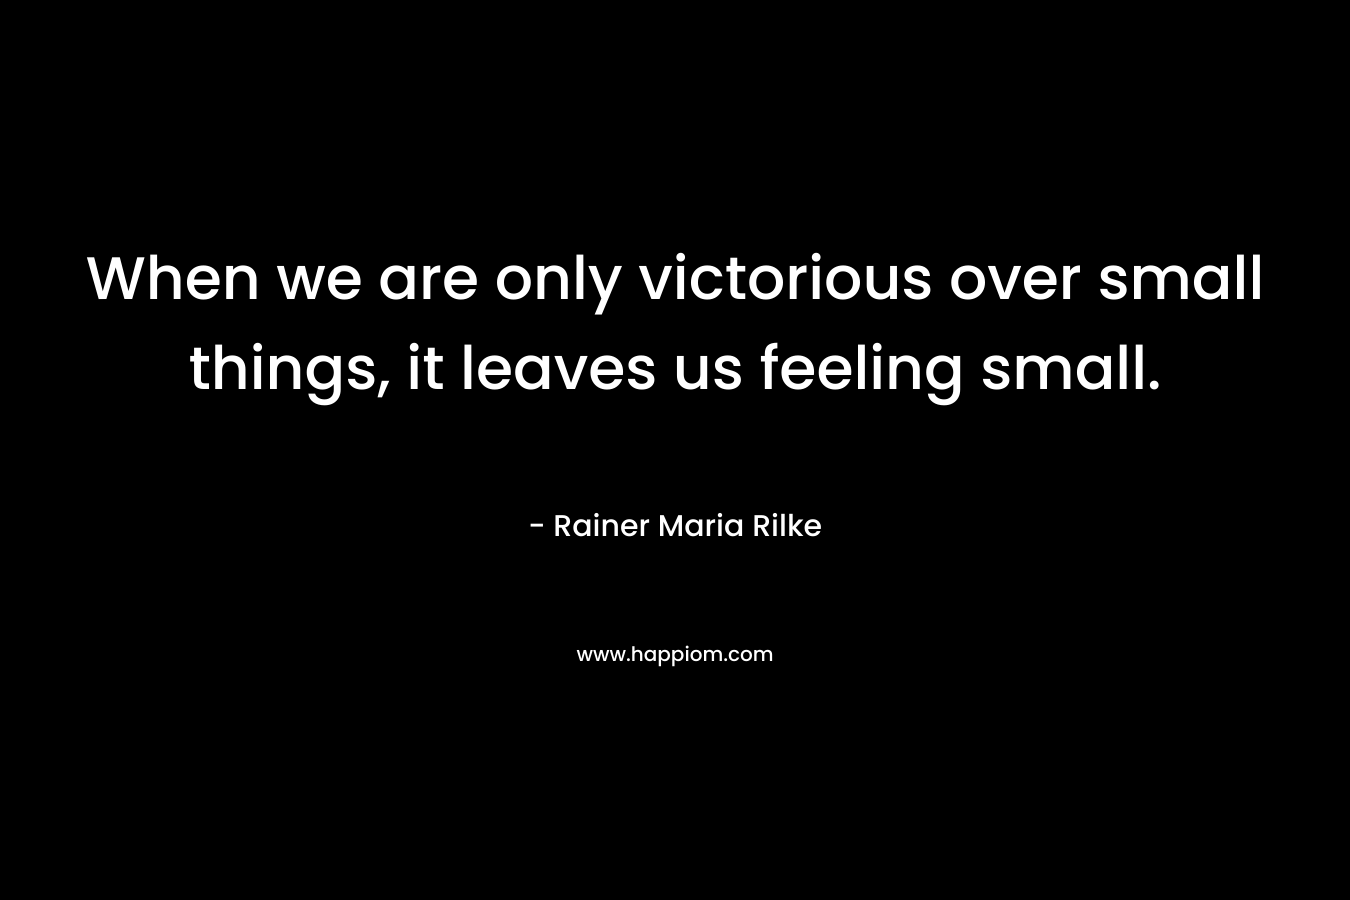 When we are only victorious over small things, it leaves us feeling small.